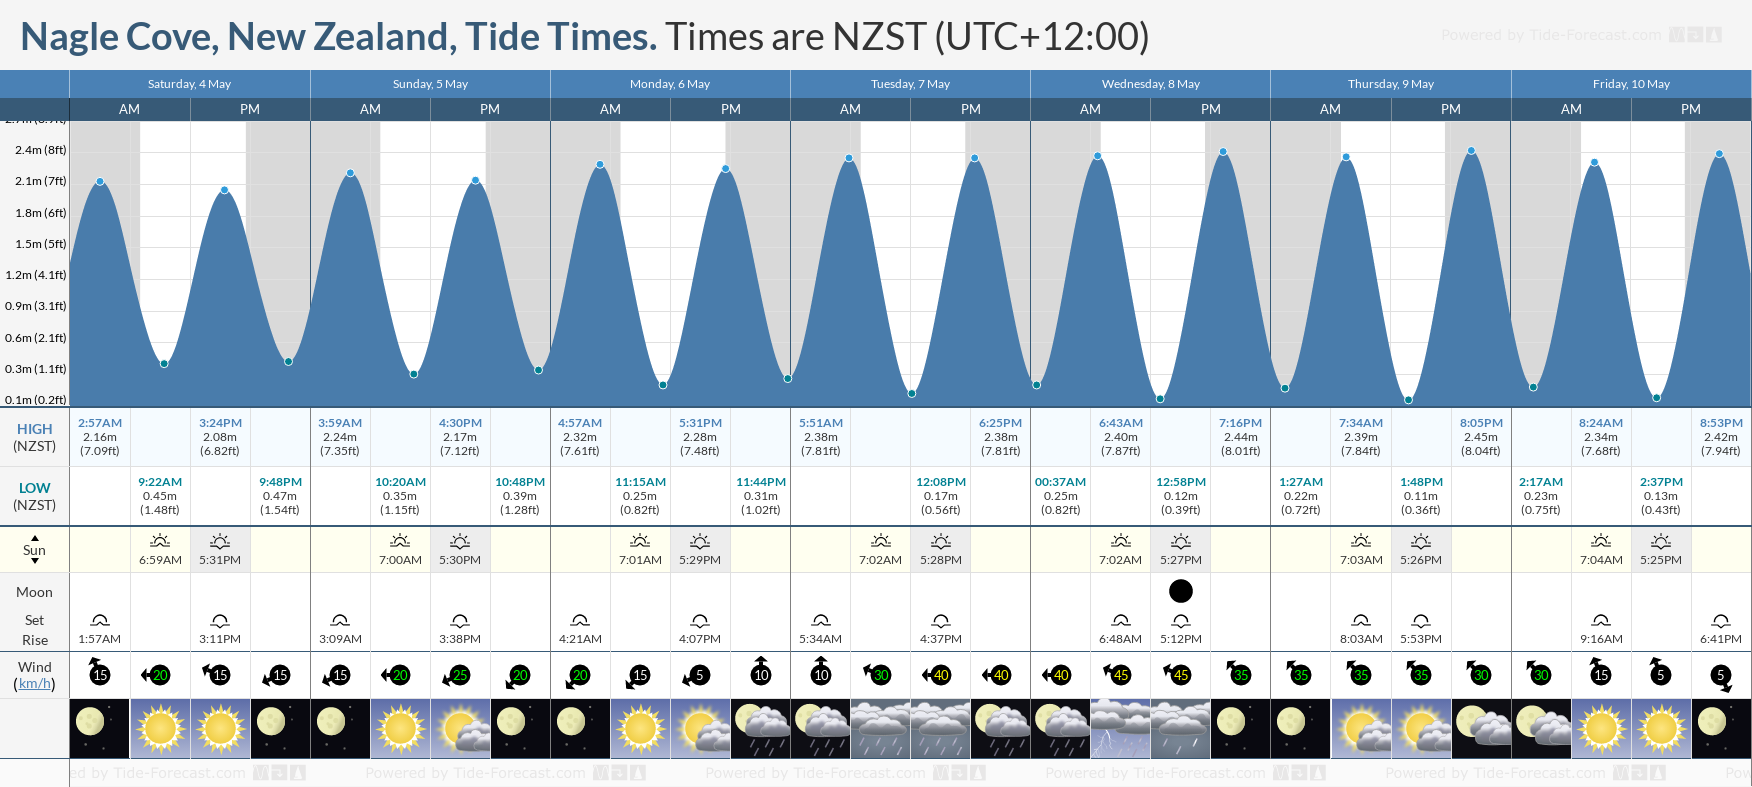 Nagle Cove, New Zealand Tide Chart including high and low tide times for the next 7 days